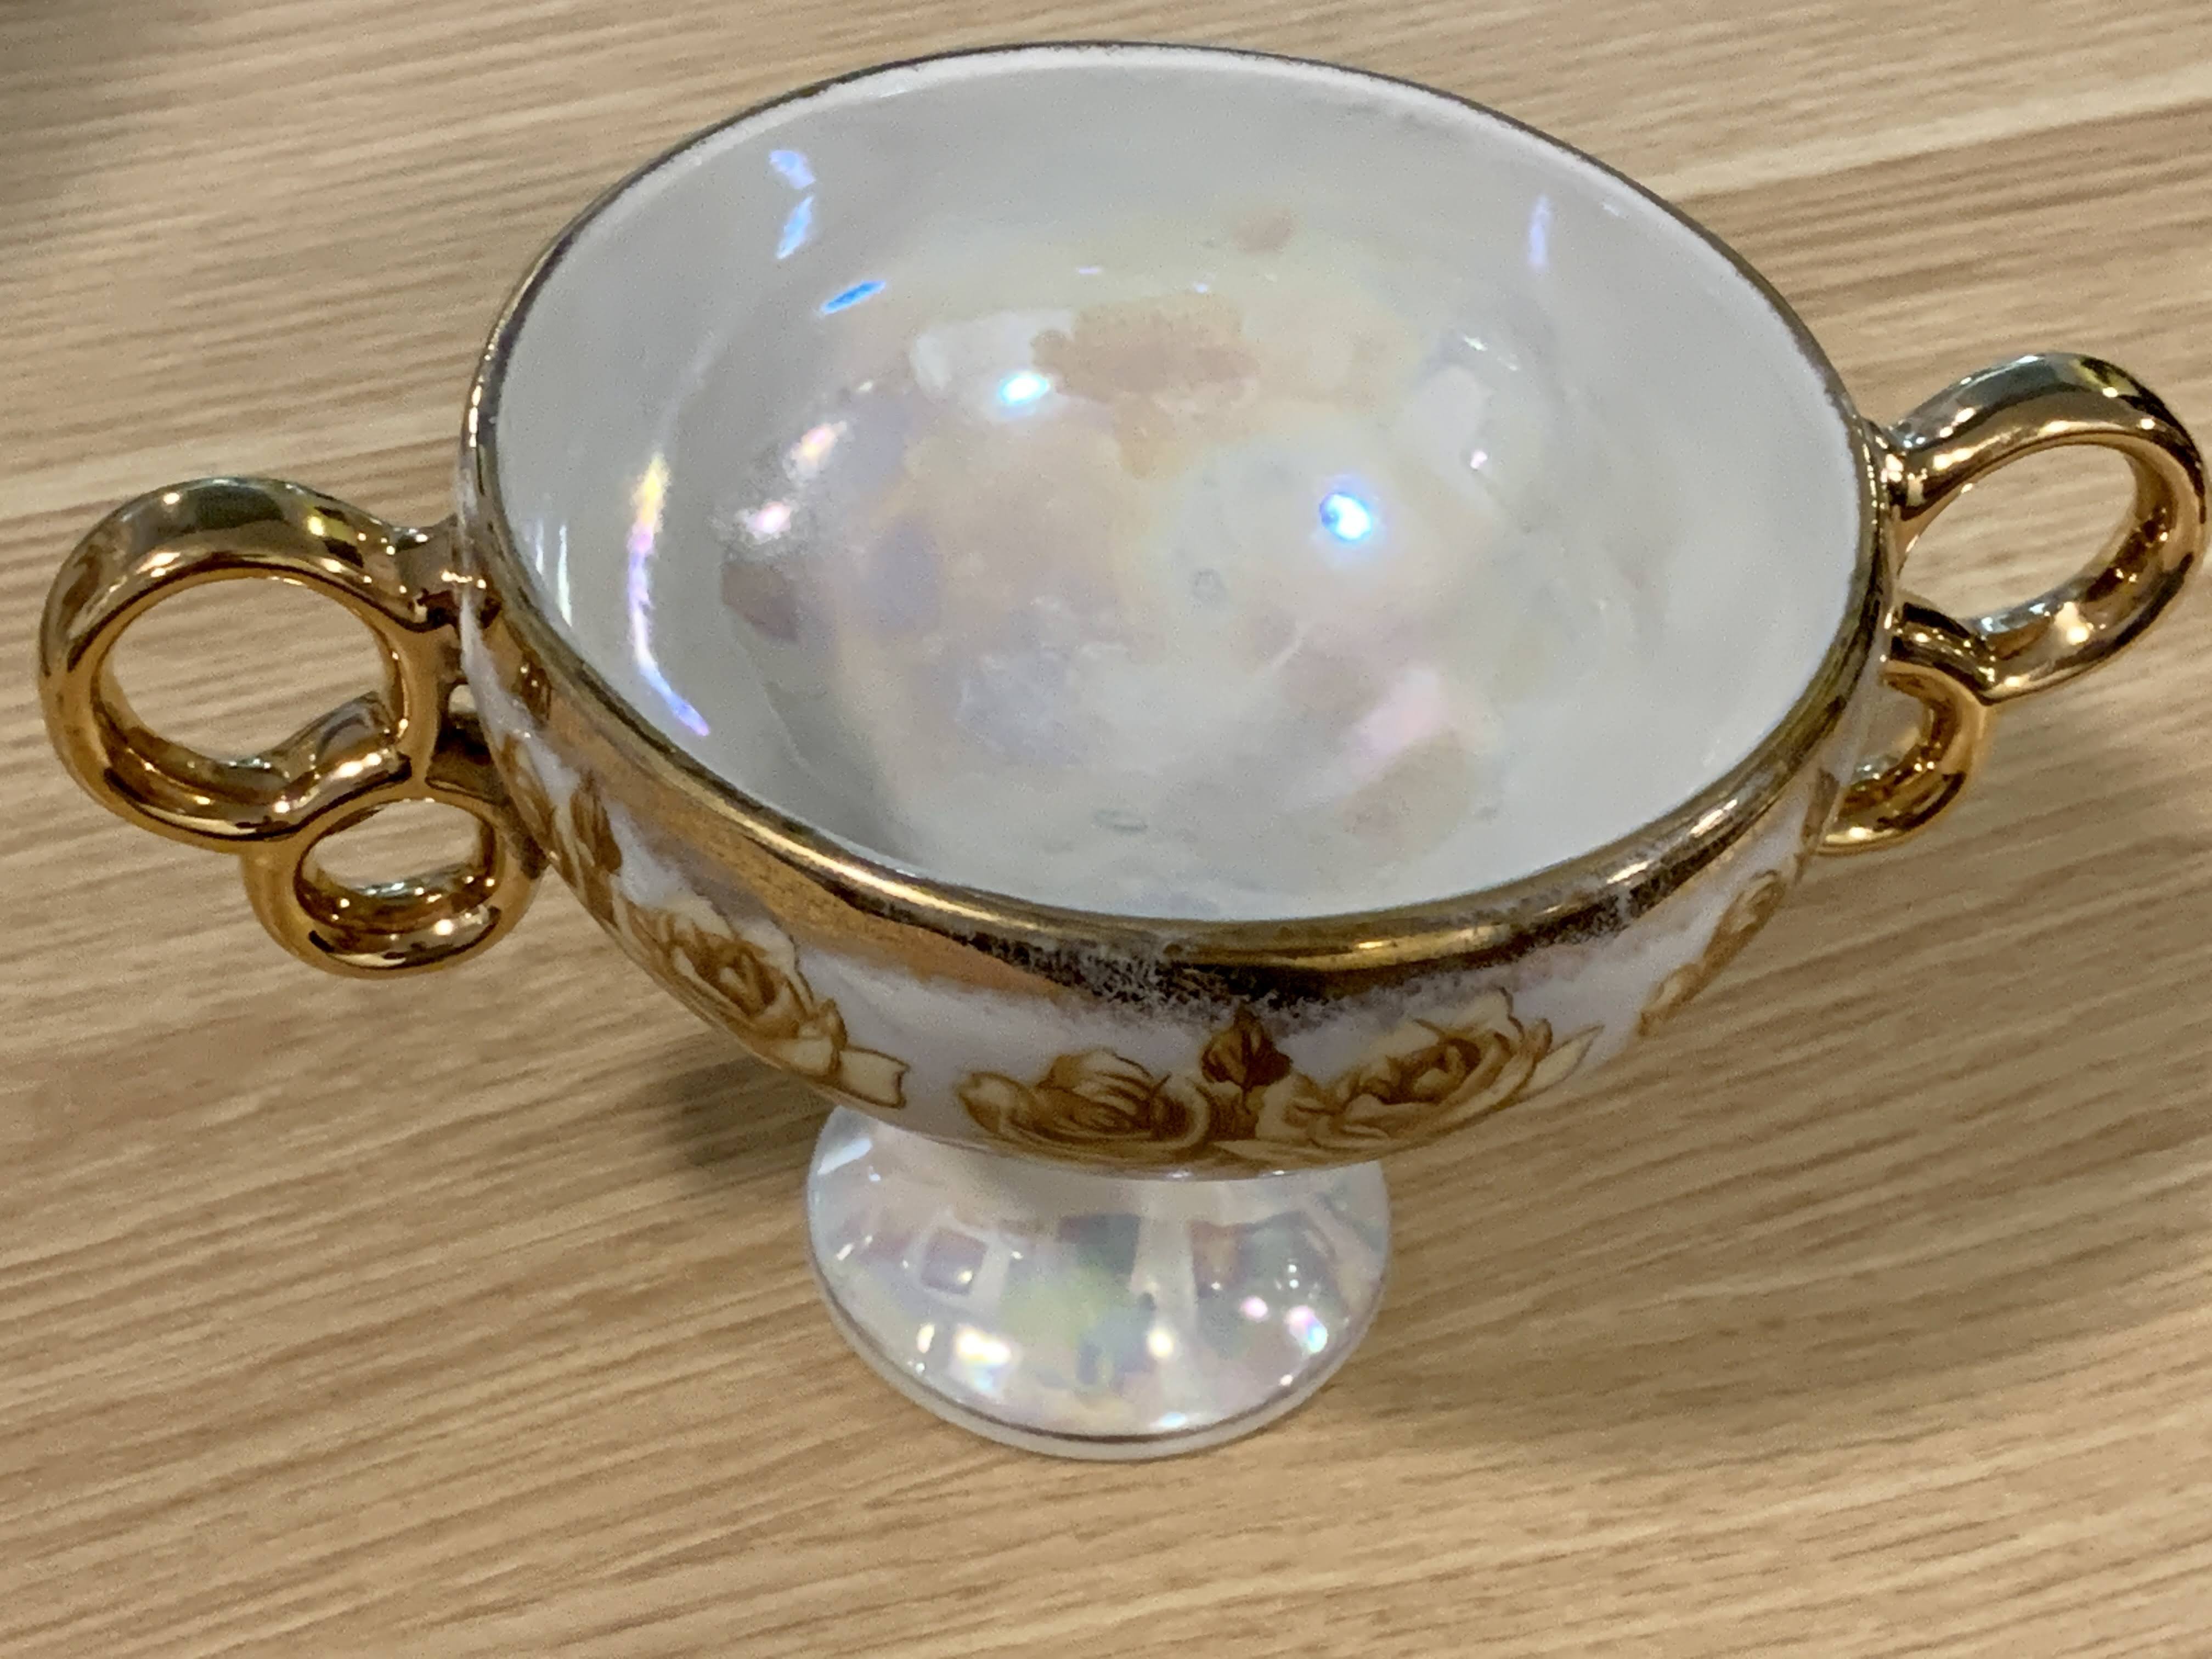 Moonstone Pearl Color - Porcelain Fine China - Authentic and Rare Floral Pattern Japanese Cup - Home Decor